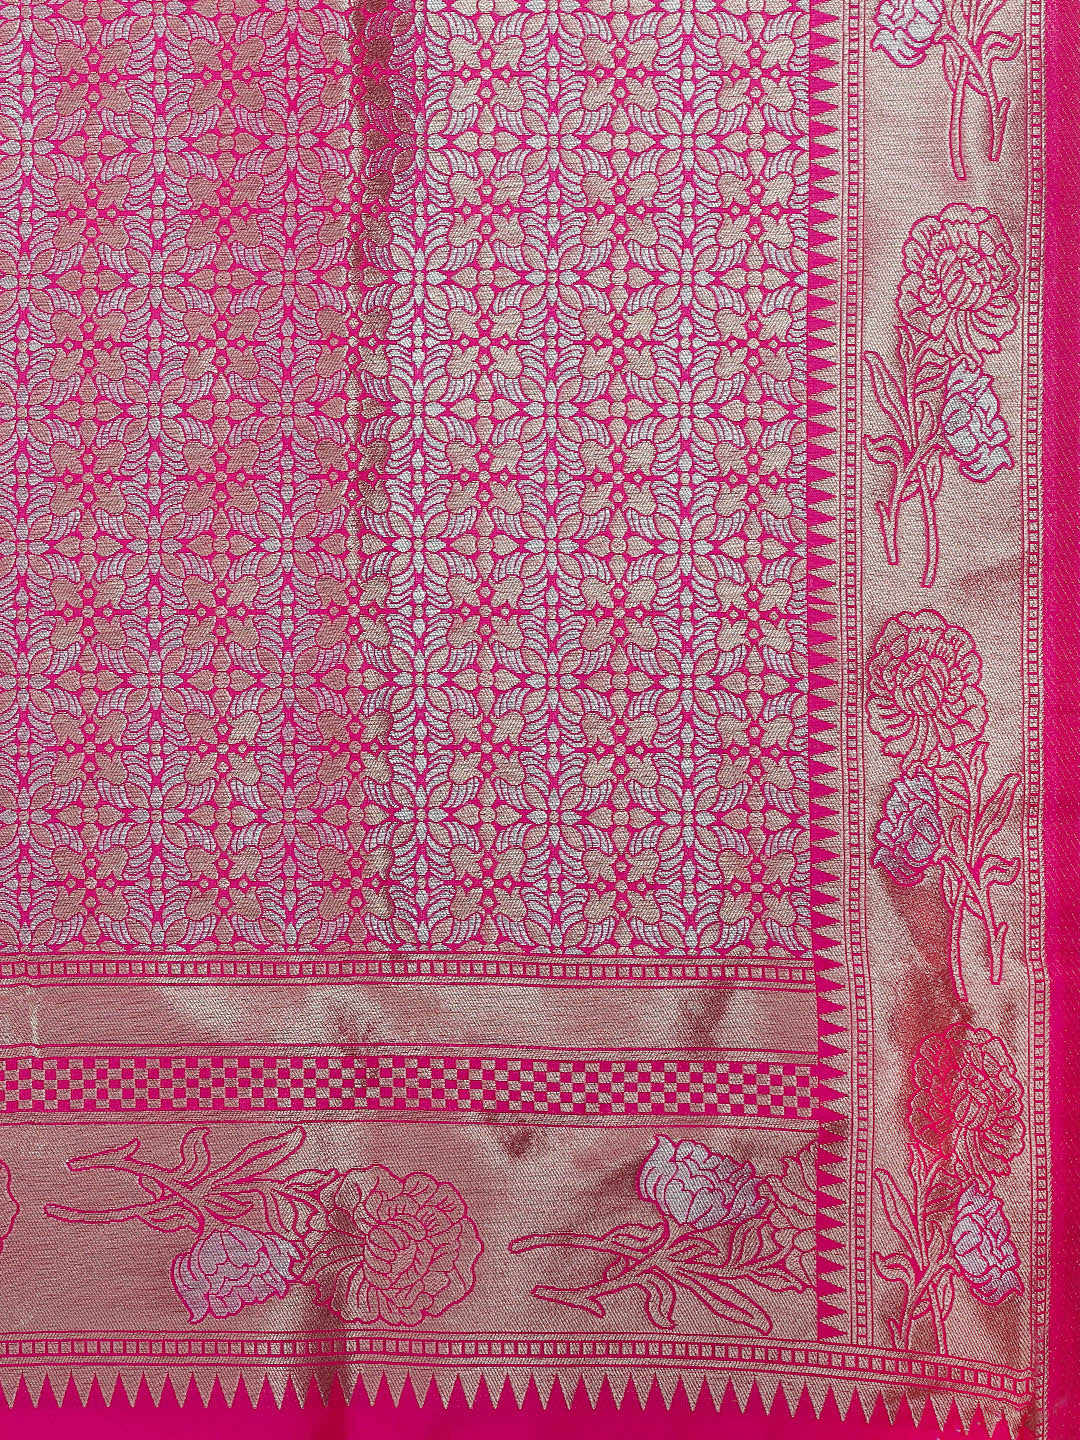 Pink Color Latest Bollywood Collection Banarasi Silk Saree Silver And Gold Toned Zari Weaving Work With Blouse